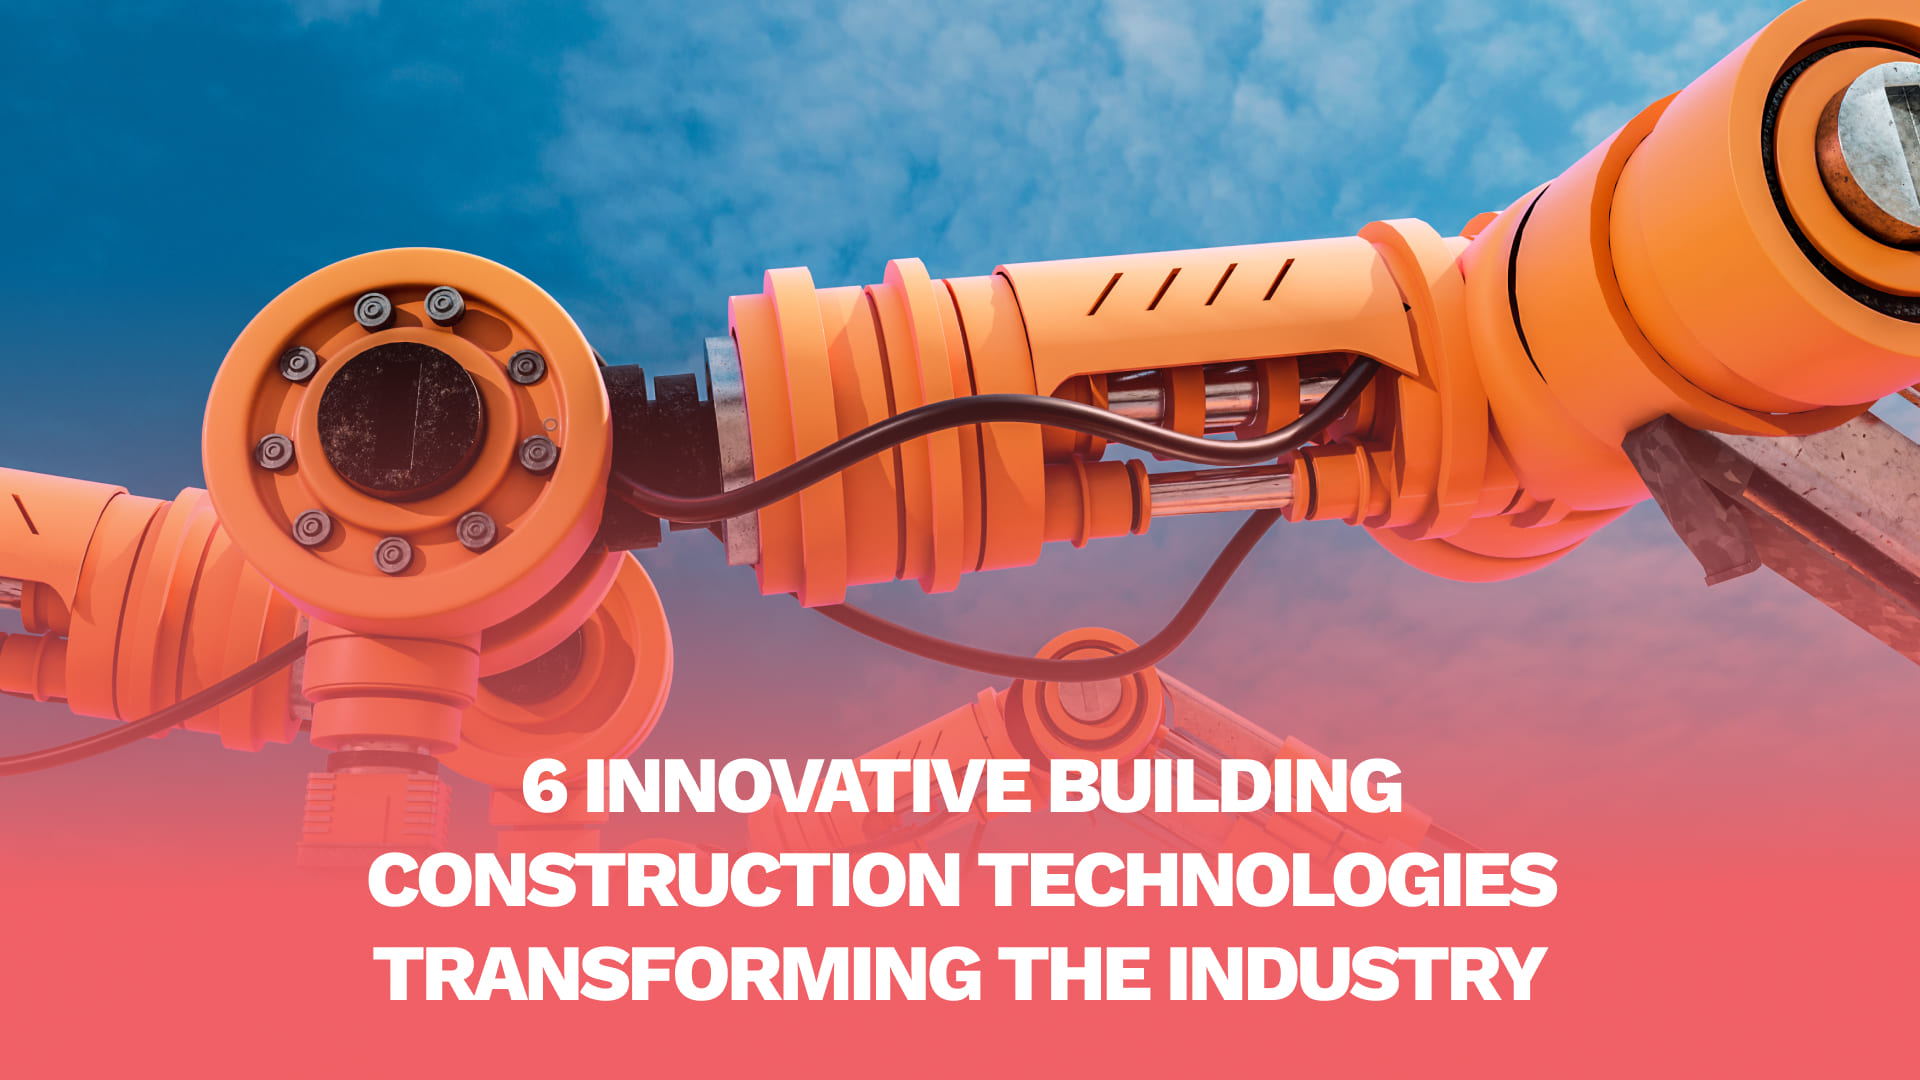 6 Most Innovative Building Construction Technologies Transforming the Industry